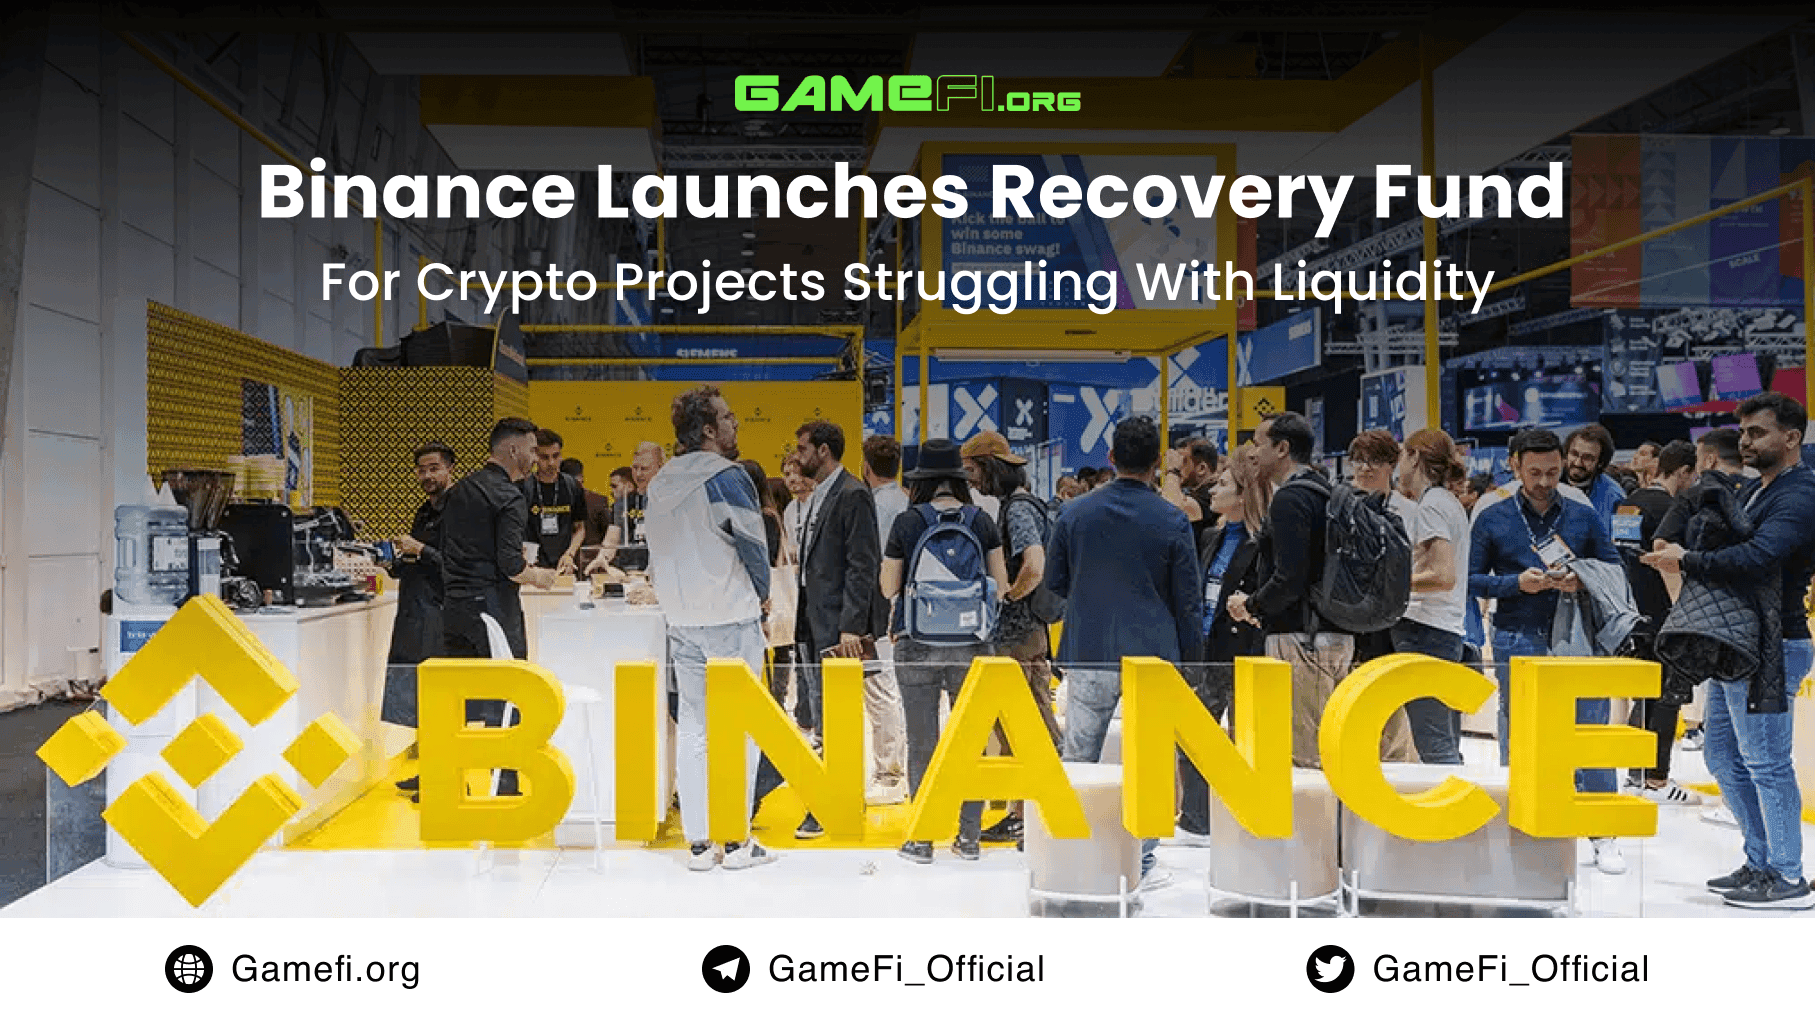 Binance Launches a Recovery Fund for Crypto Projects Struggling with Liquidity